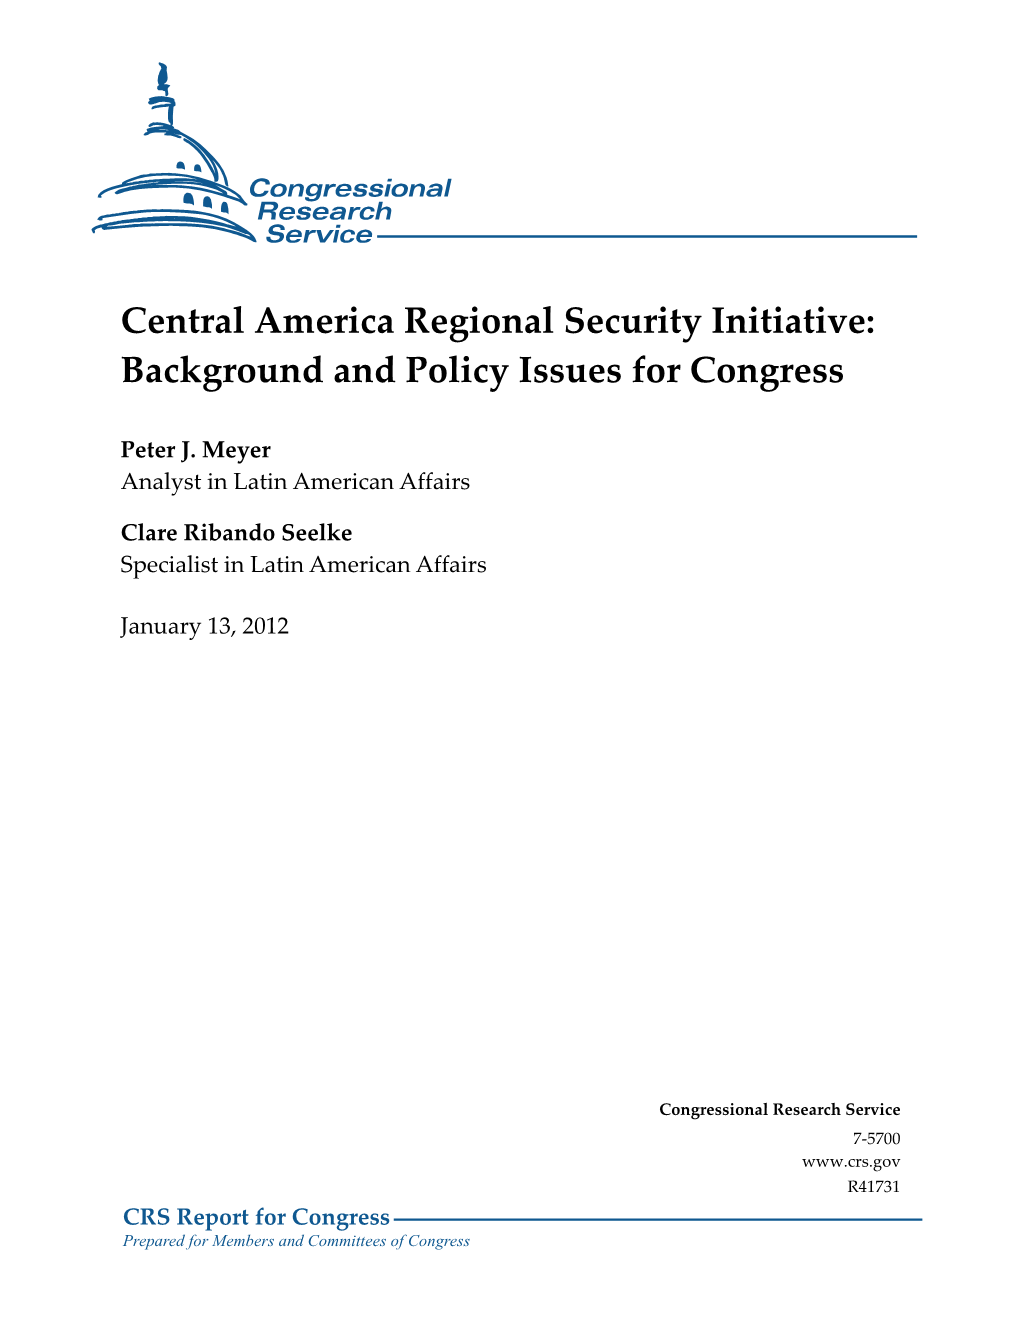 Central America Regional Security Initiative: Background and Policy Issues for Congress